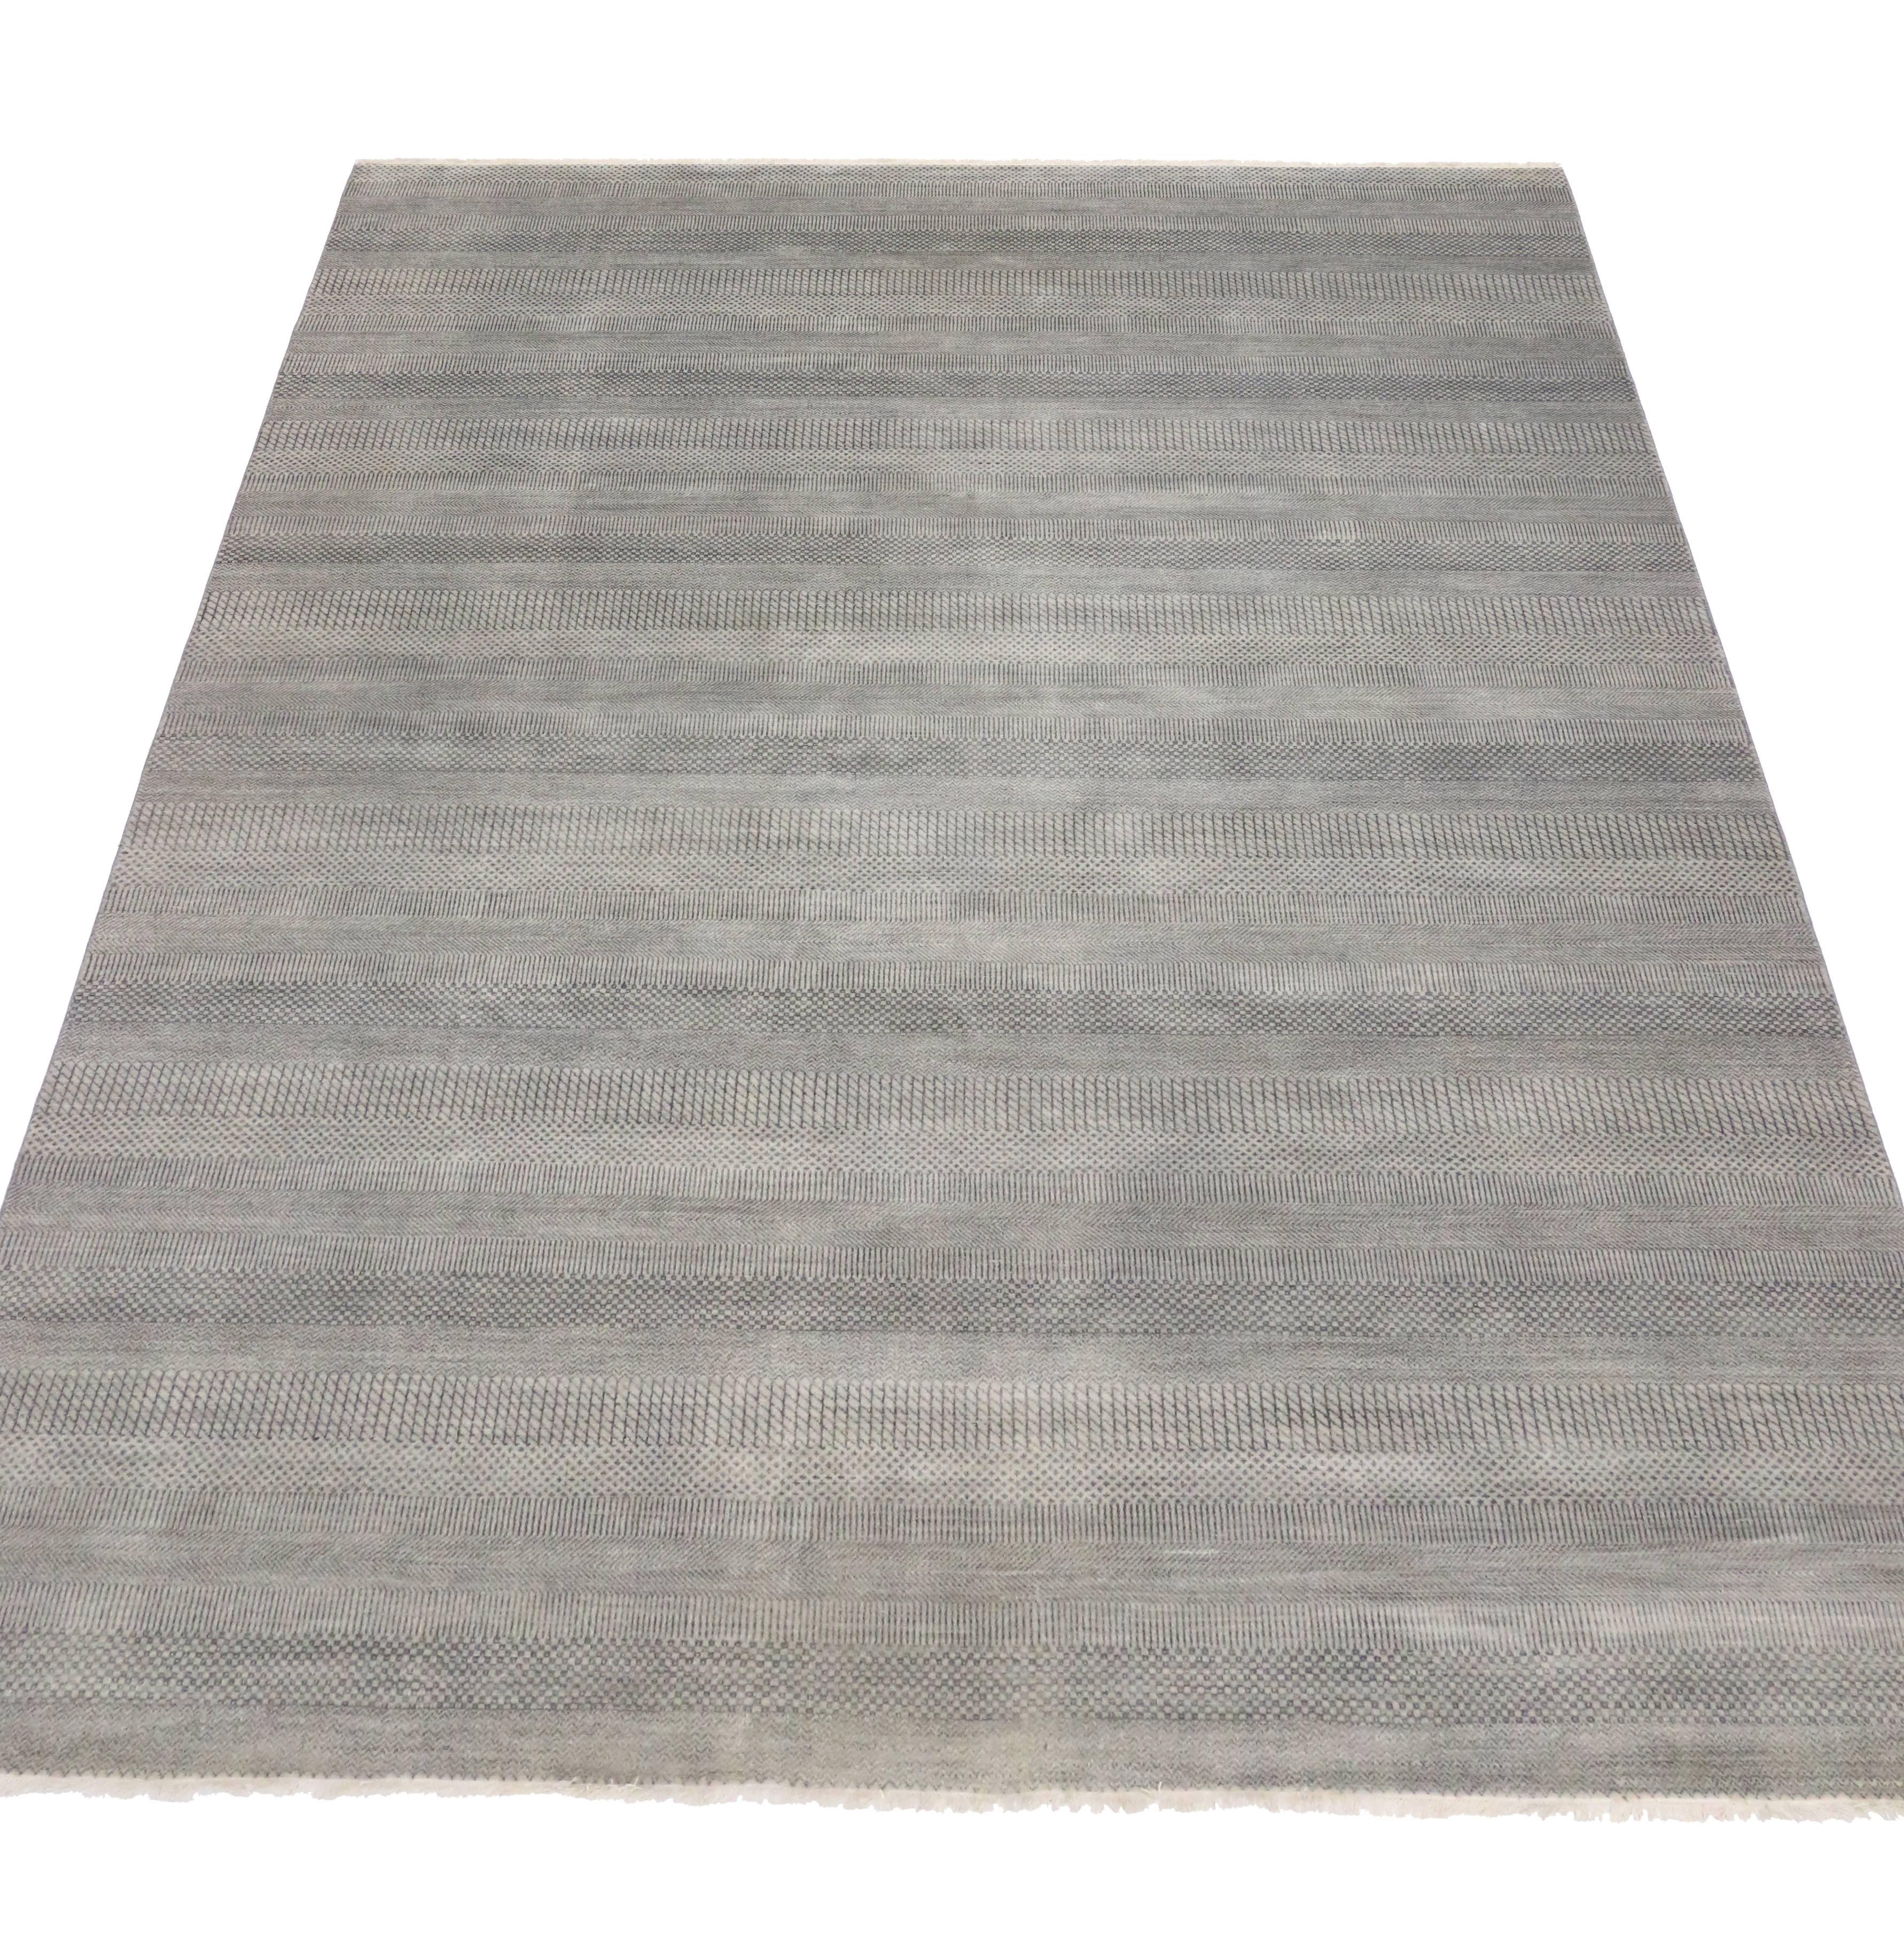 30011 Transitional Gray Area Rug with Minimalist Contemporary Style. Striking in its style and delicate beauty, this transitional gray area rug features a subtle geometric pattern with contemporary minimalist style. The cool and casual light gray